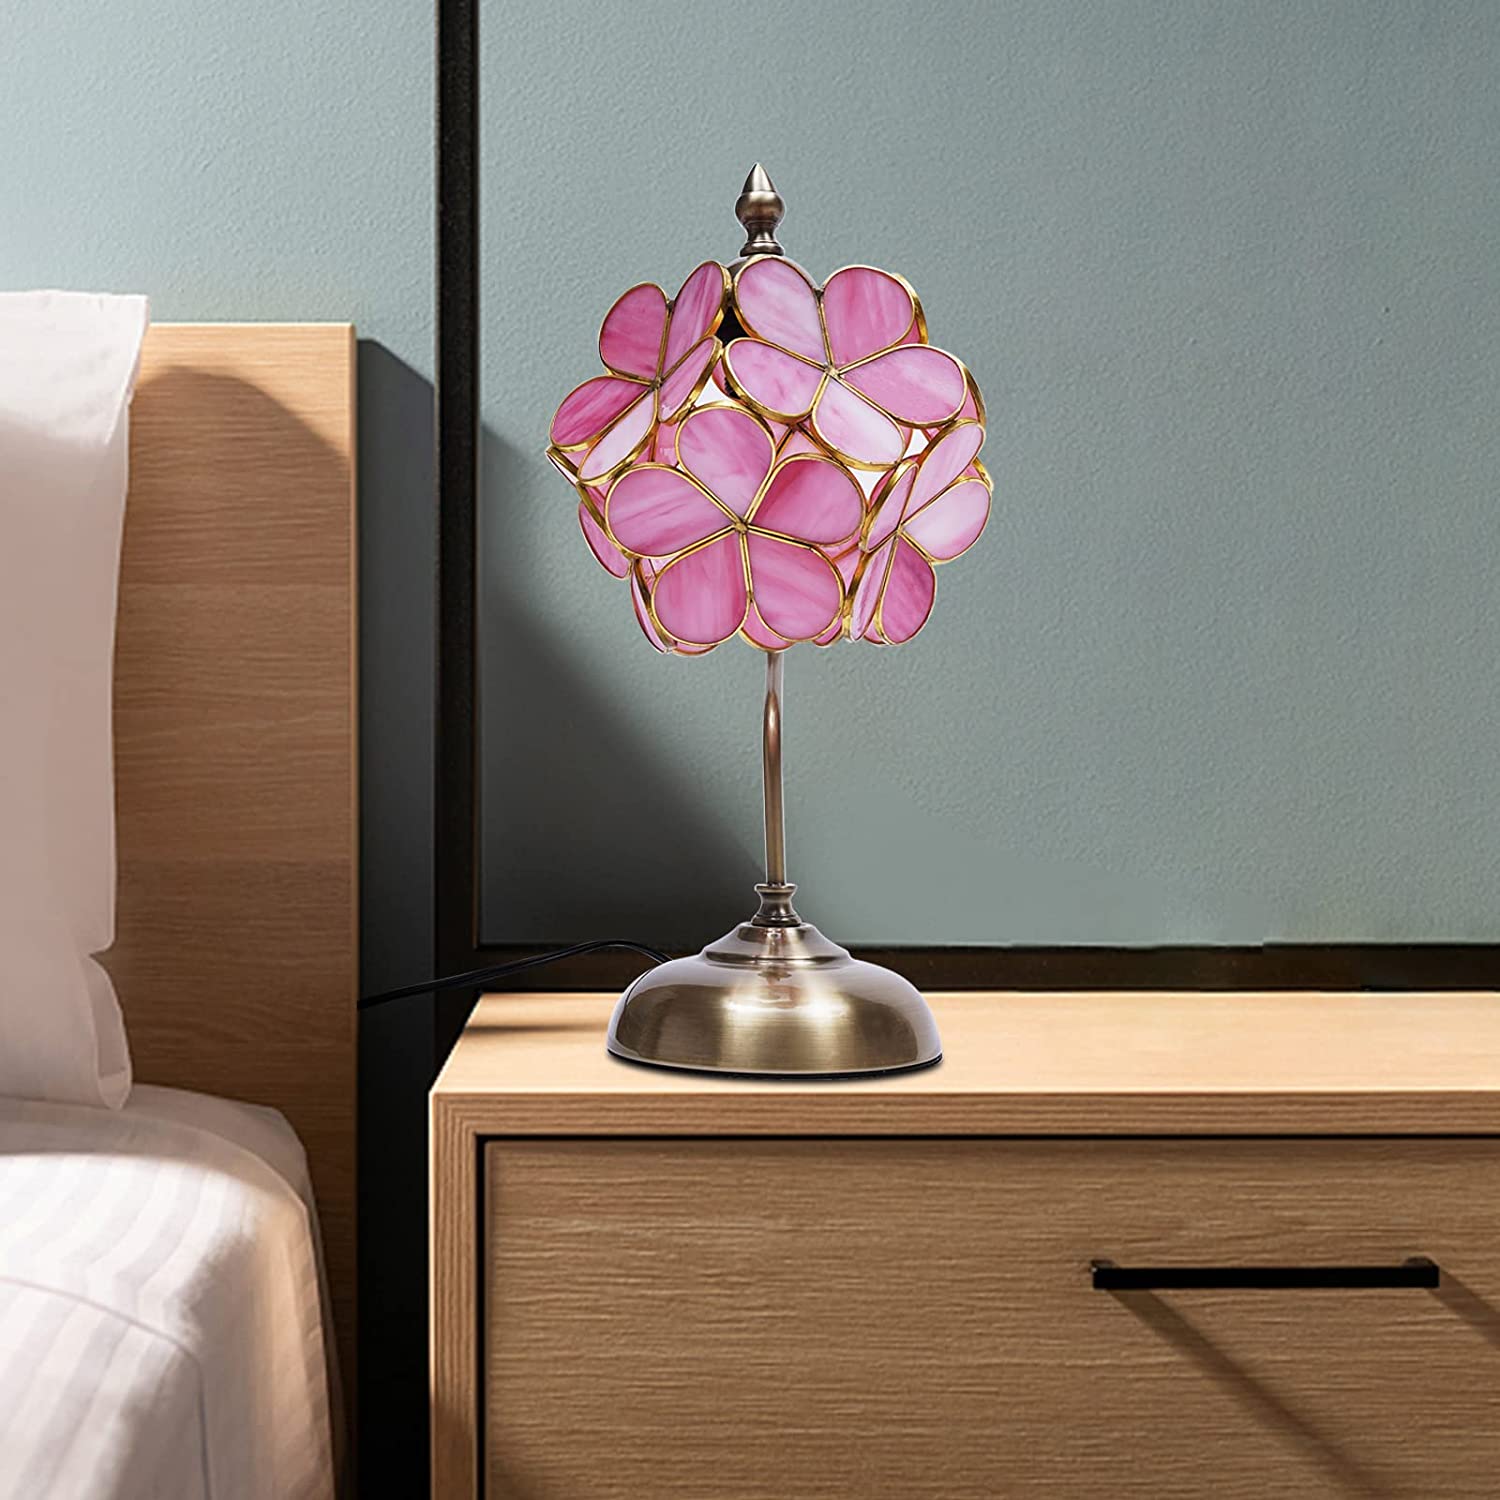 OUKANING Flower Desk Light Reading Lamp Eye Protection Stained Glass Petal Table Lamp